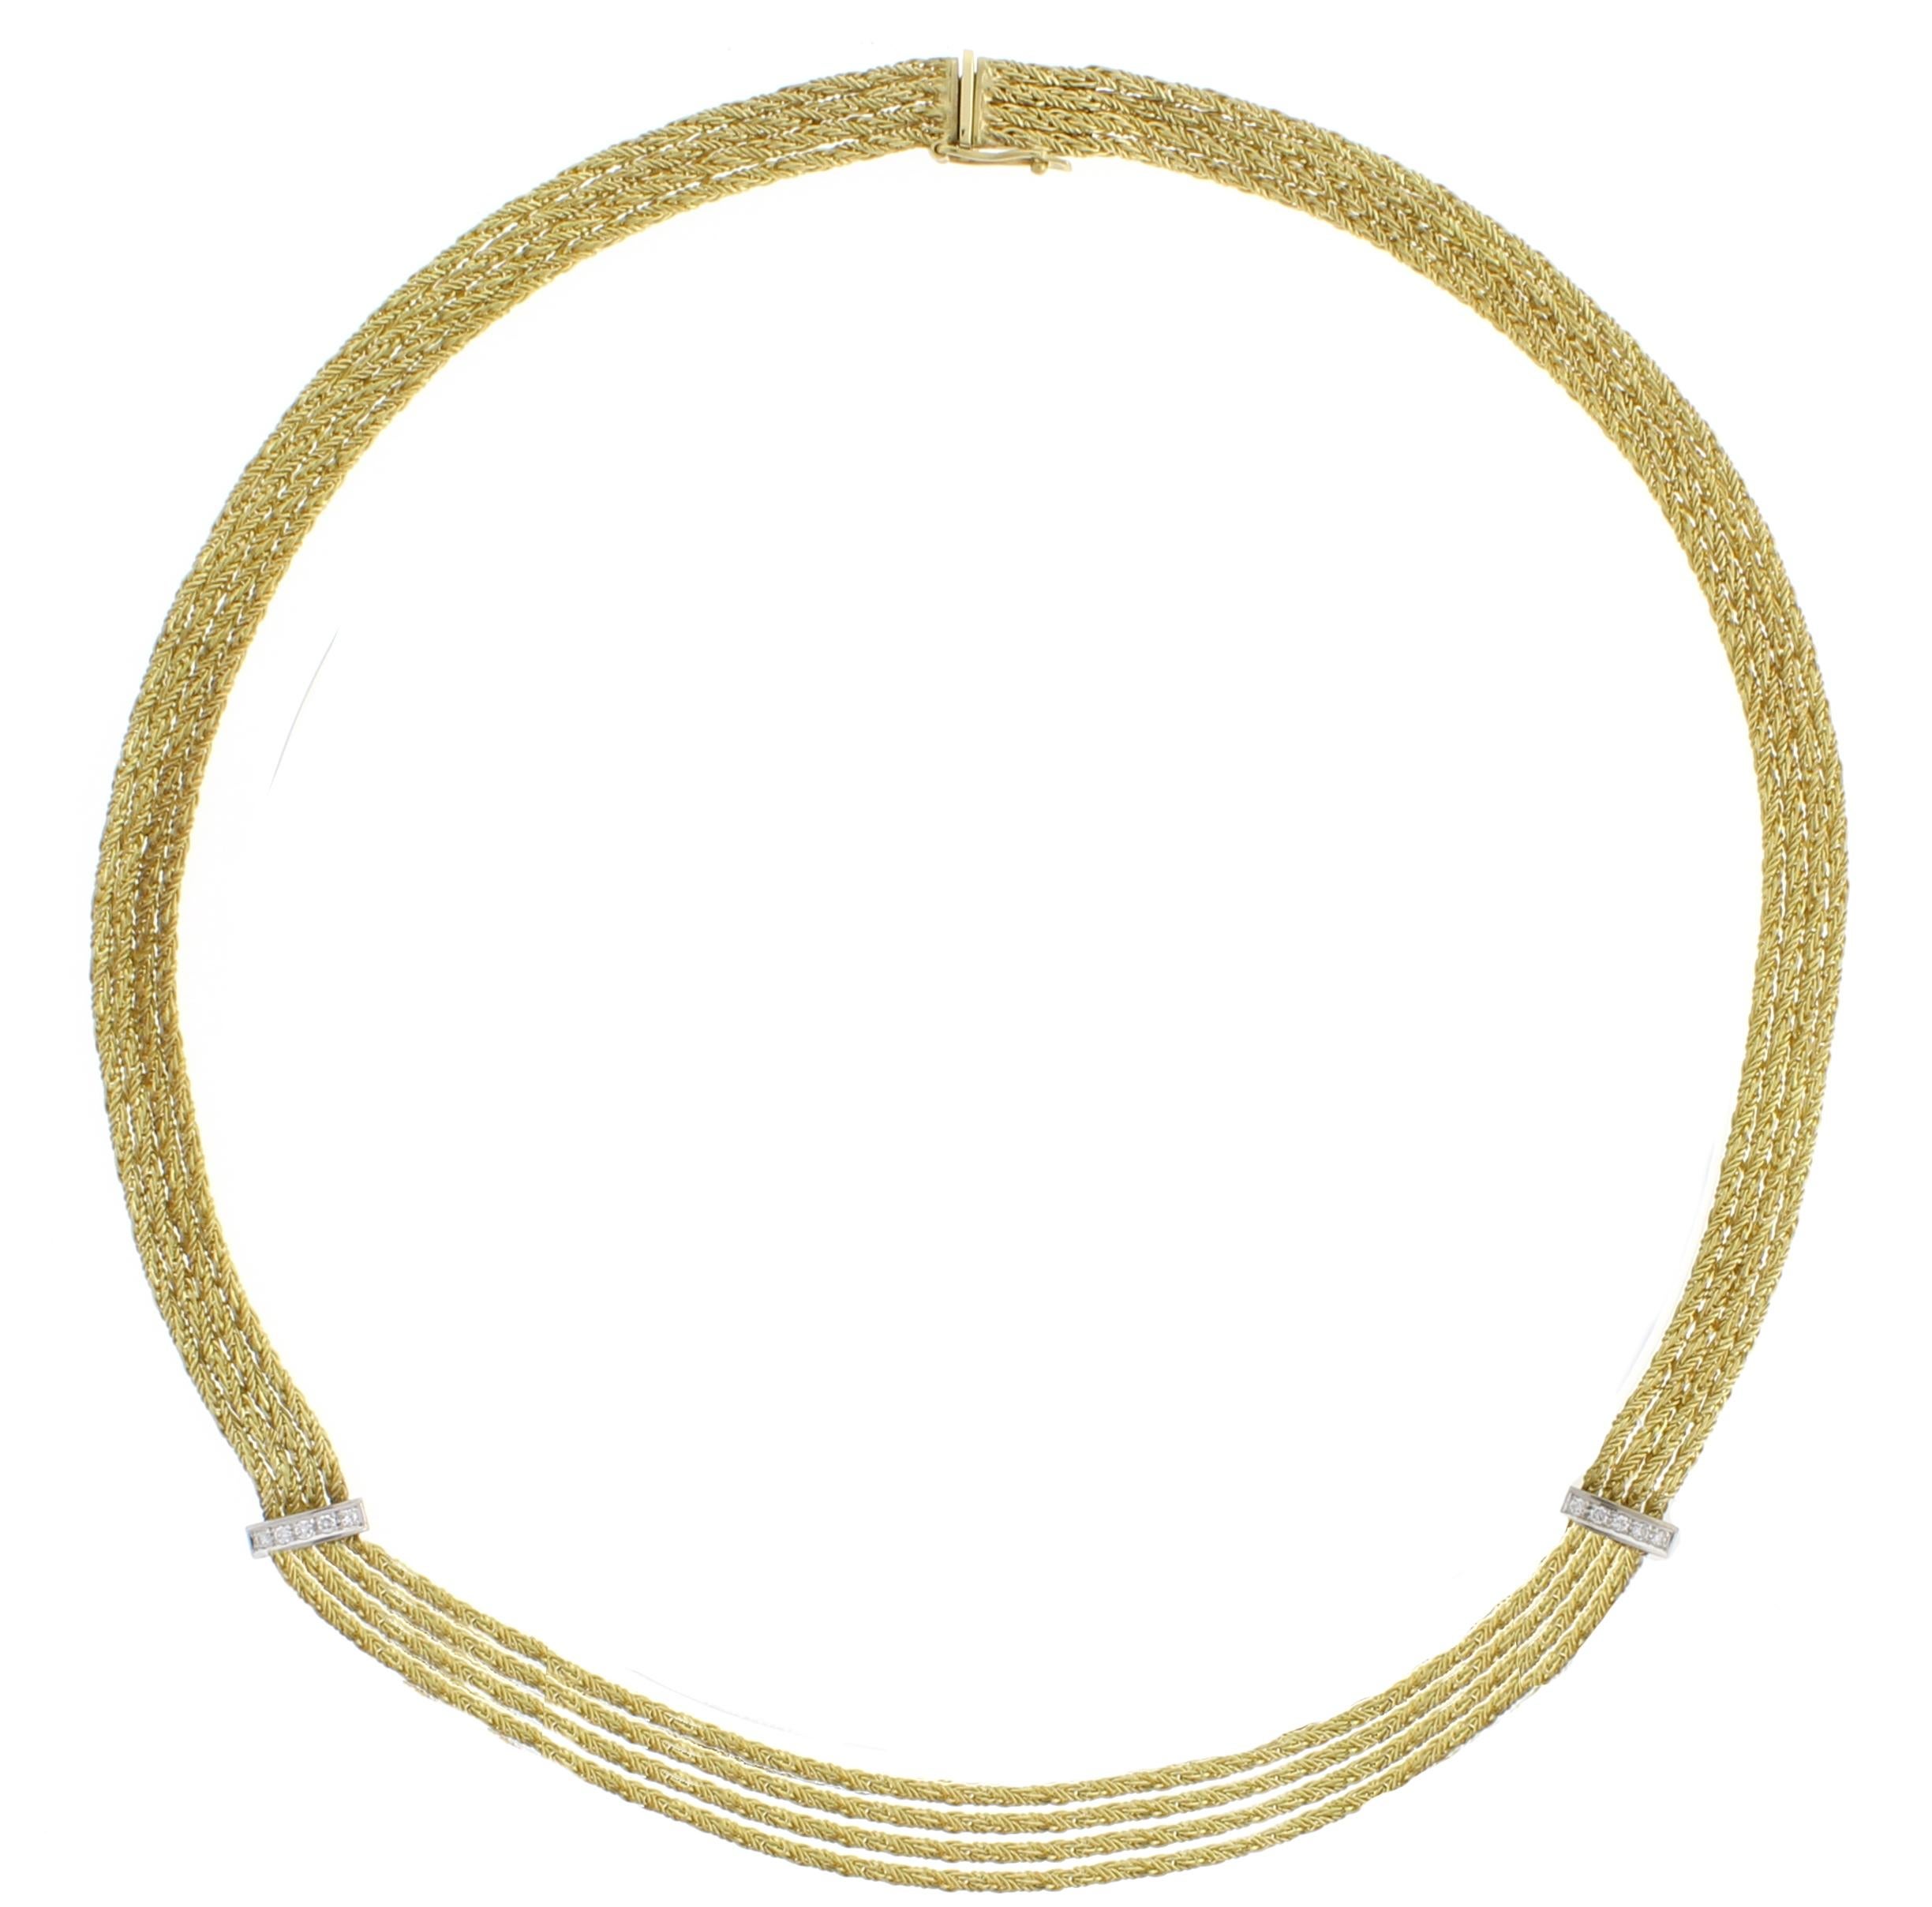 From Tiffany & Co. a four stand 18 karat gold necklace with diamonds
♦ Designer: Tiffany & Co.
♦ Metal: 18 karat
♦ 10 Diamonds=.20
♦ Circa 1980s
♦ 16.5 inches, 3/8 of and inch wide
♦34.5 grams
♦ Condition: Excellent , pre-owned
♦ Price: Based on the